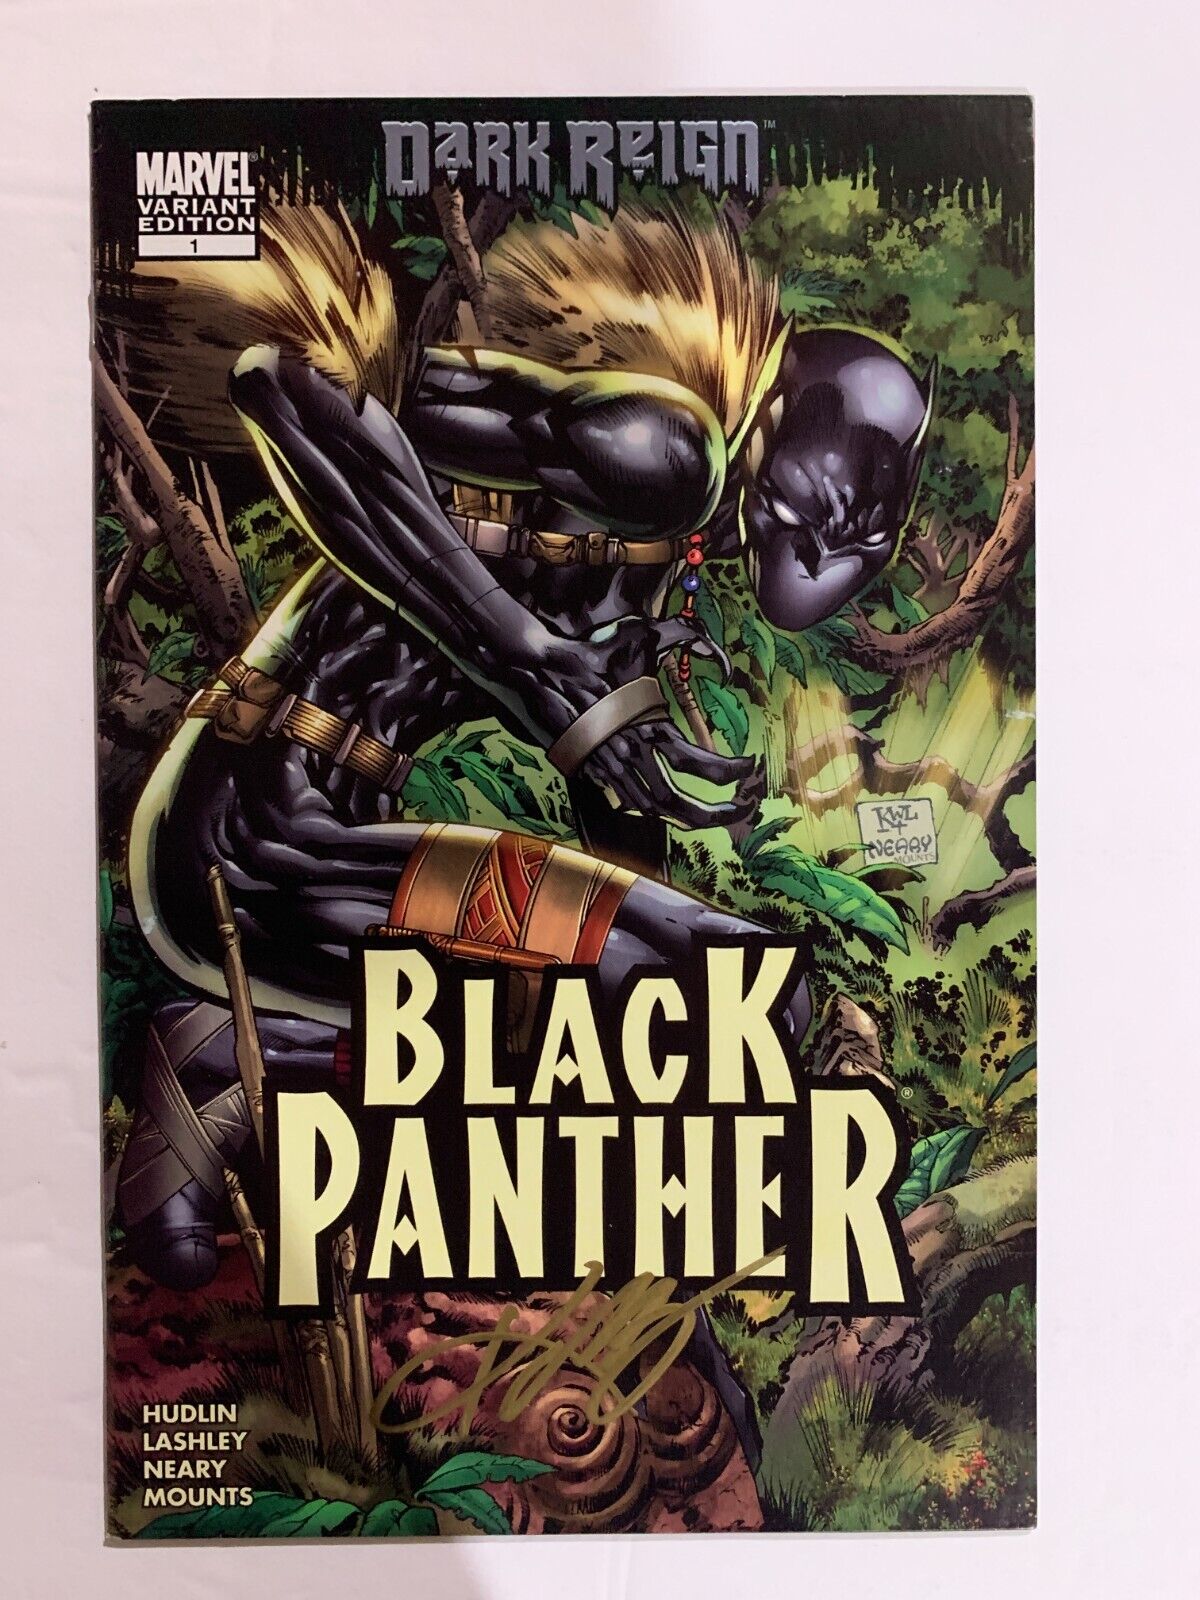 Black Panther Dark Reign #1 Variant - 1st SHURI in costume as Black Panther